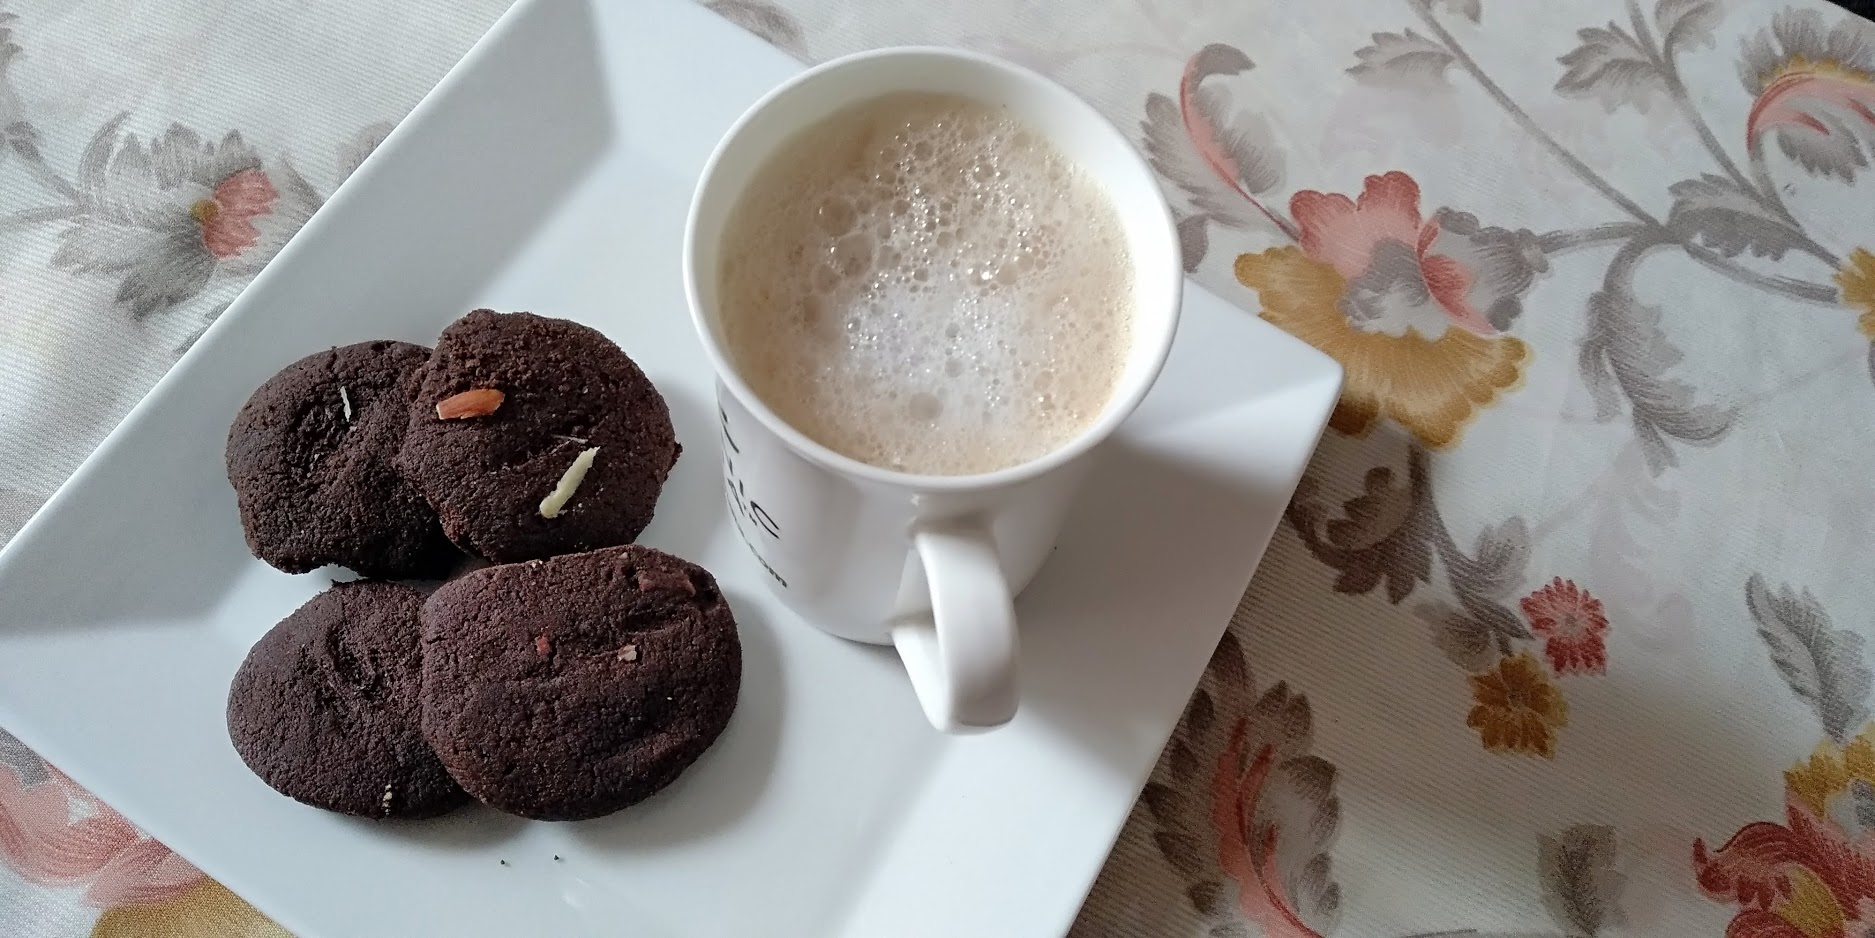 Ginger Basil Coffee with Cookies